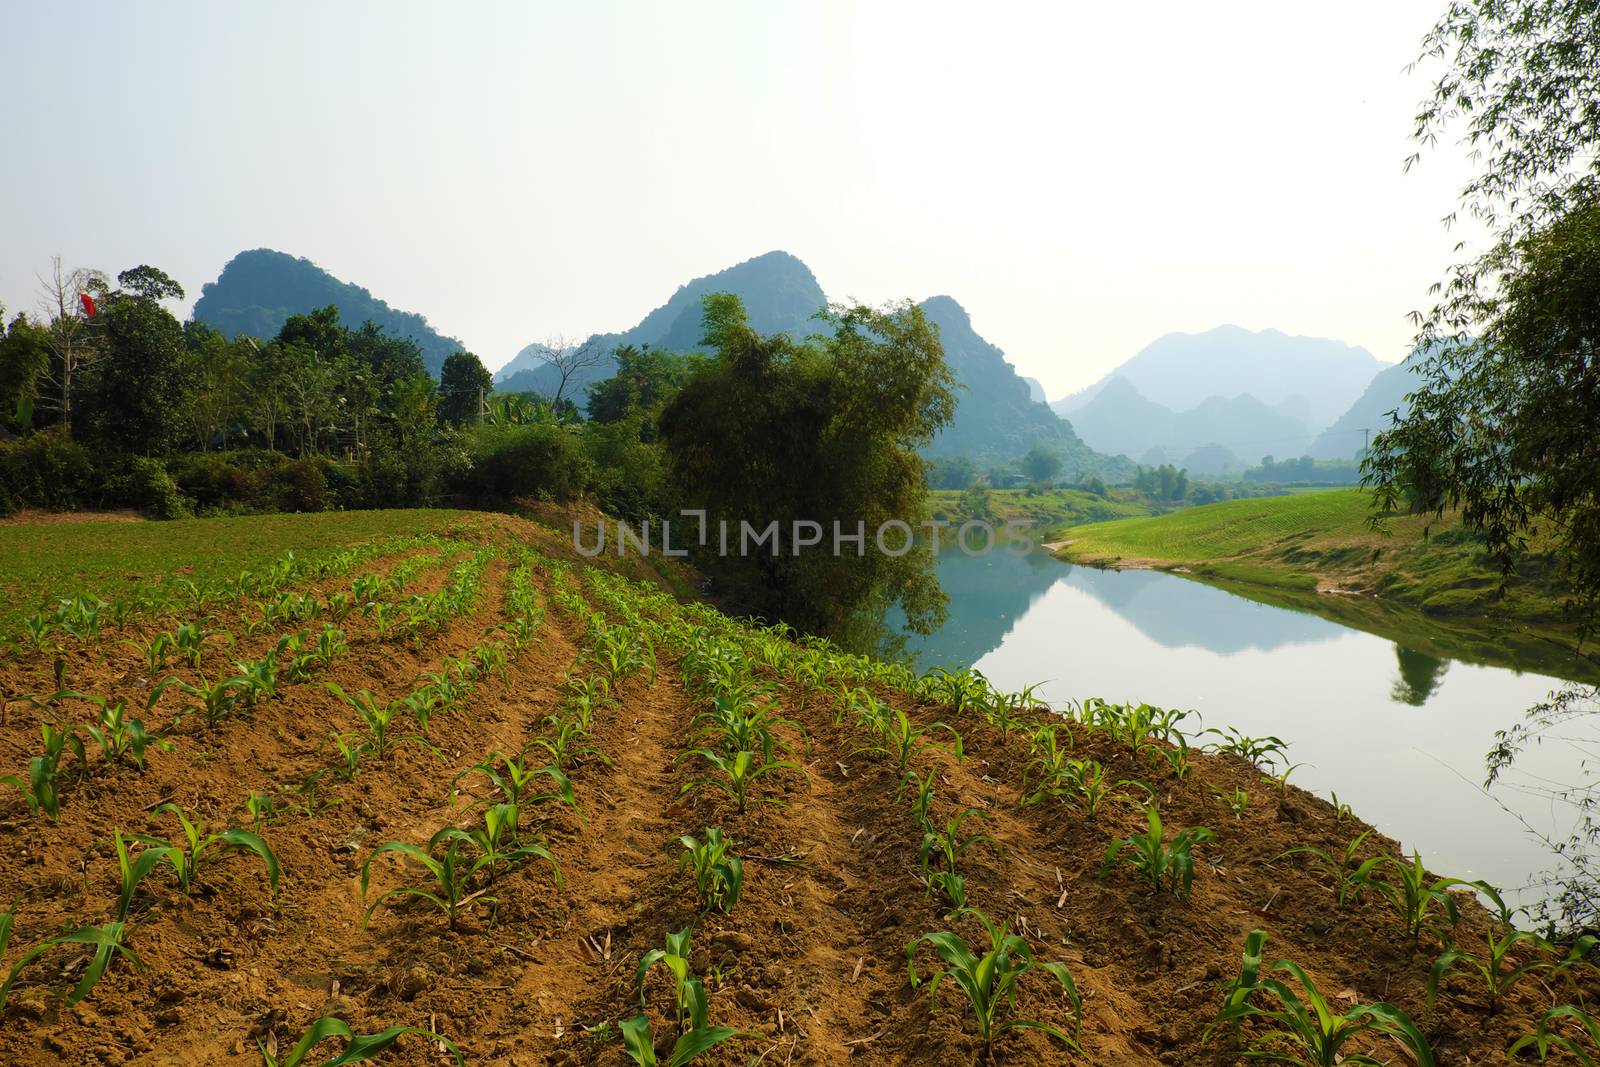 Beautiful countryside of Quang Binh, Viet Nam on day with green agriculture field near river, mountains chain reflect oh water, fresh air, eco green make nice destination when travel to Vietnam